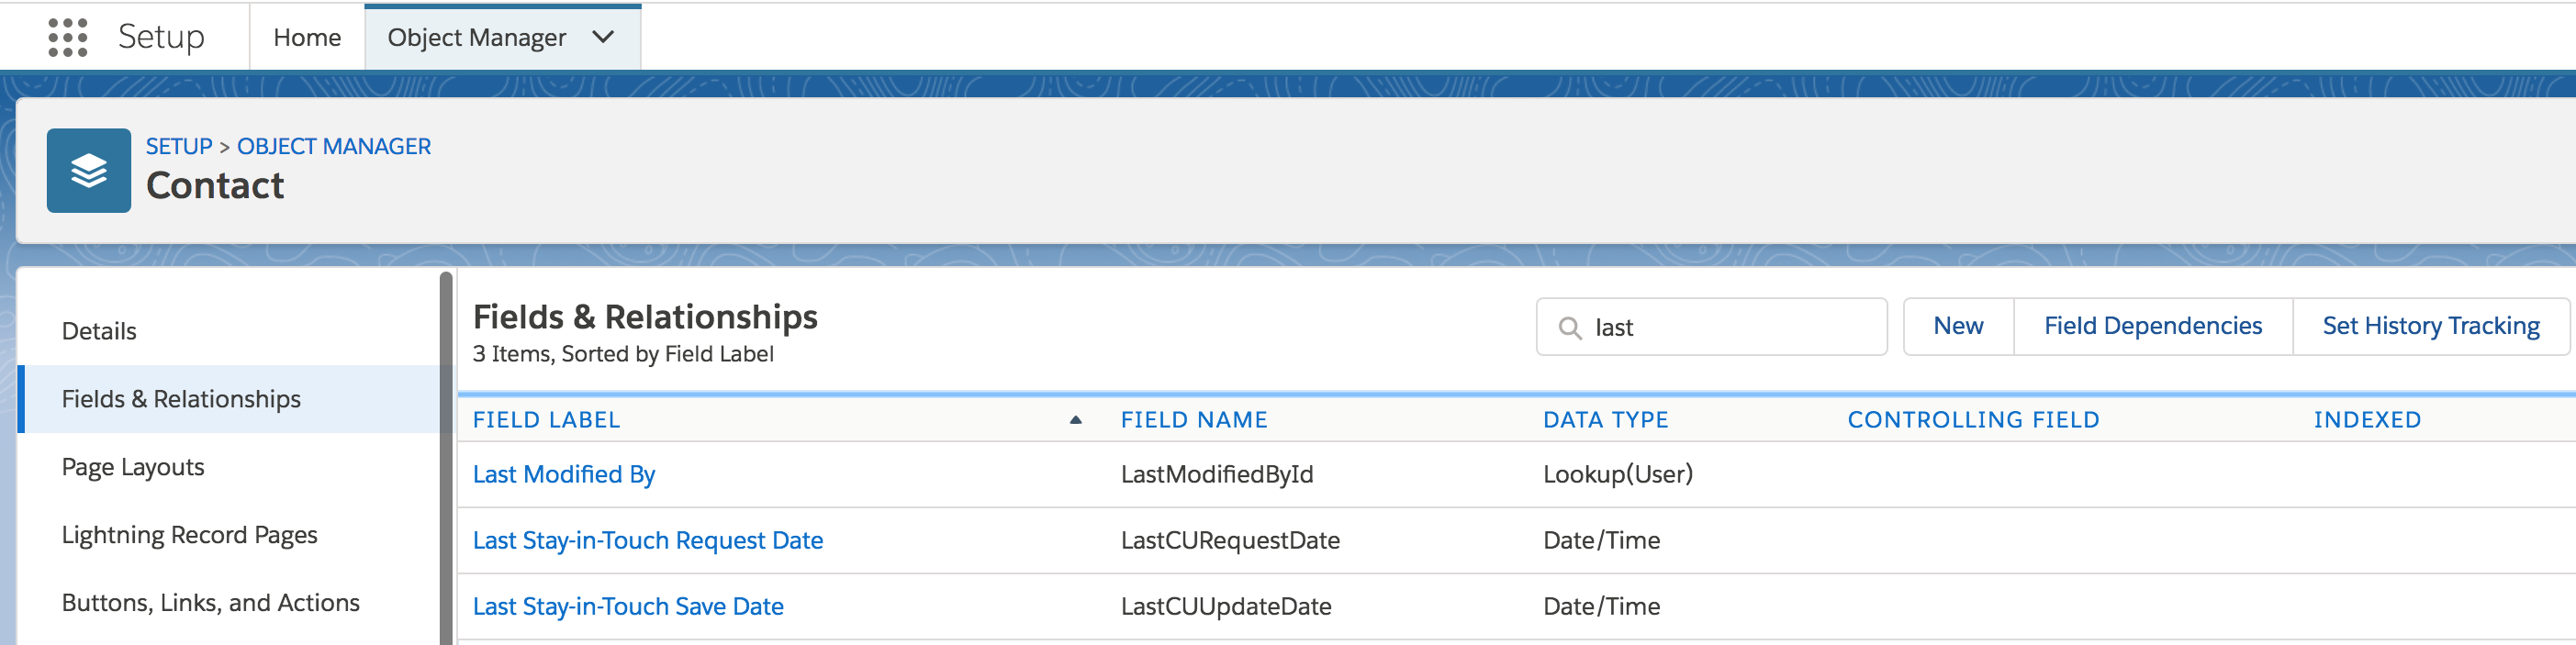 Screenshot of Field Names for the Contact Object - no LastName listed